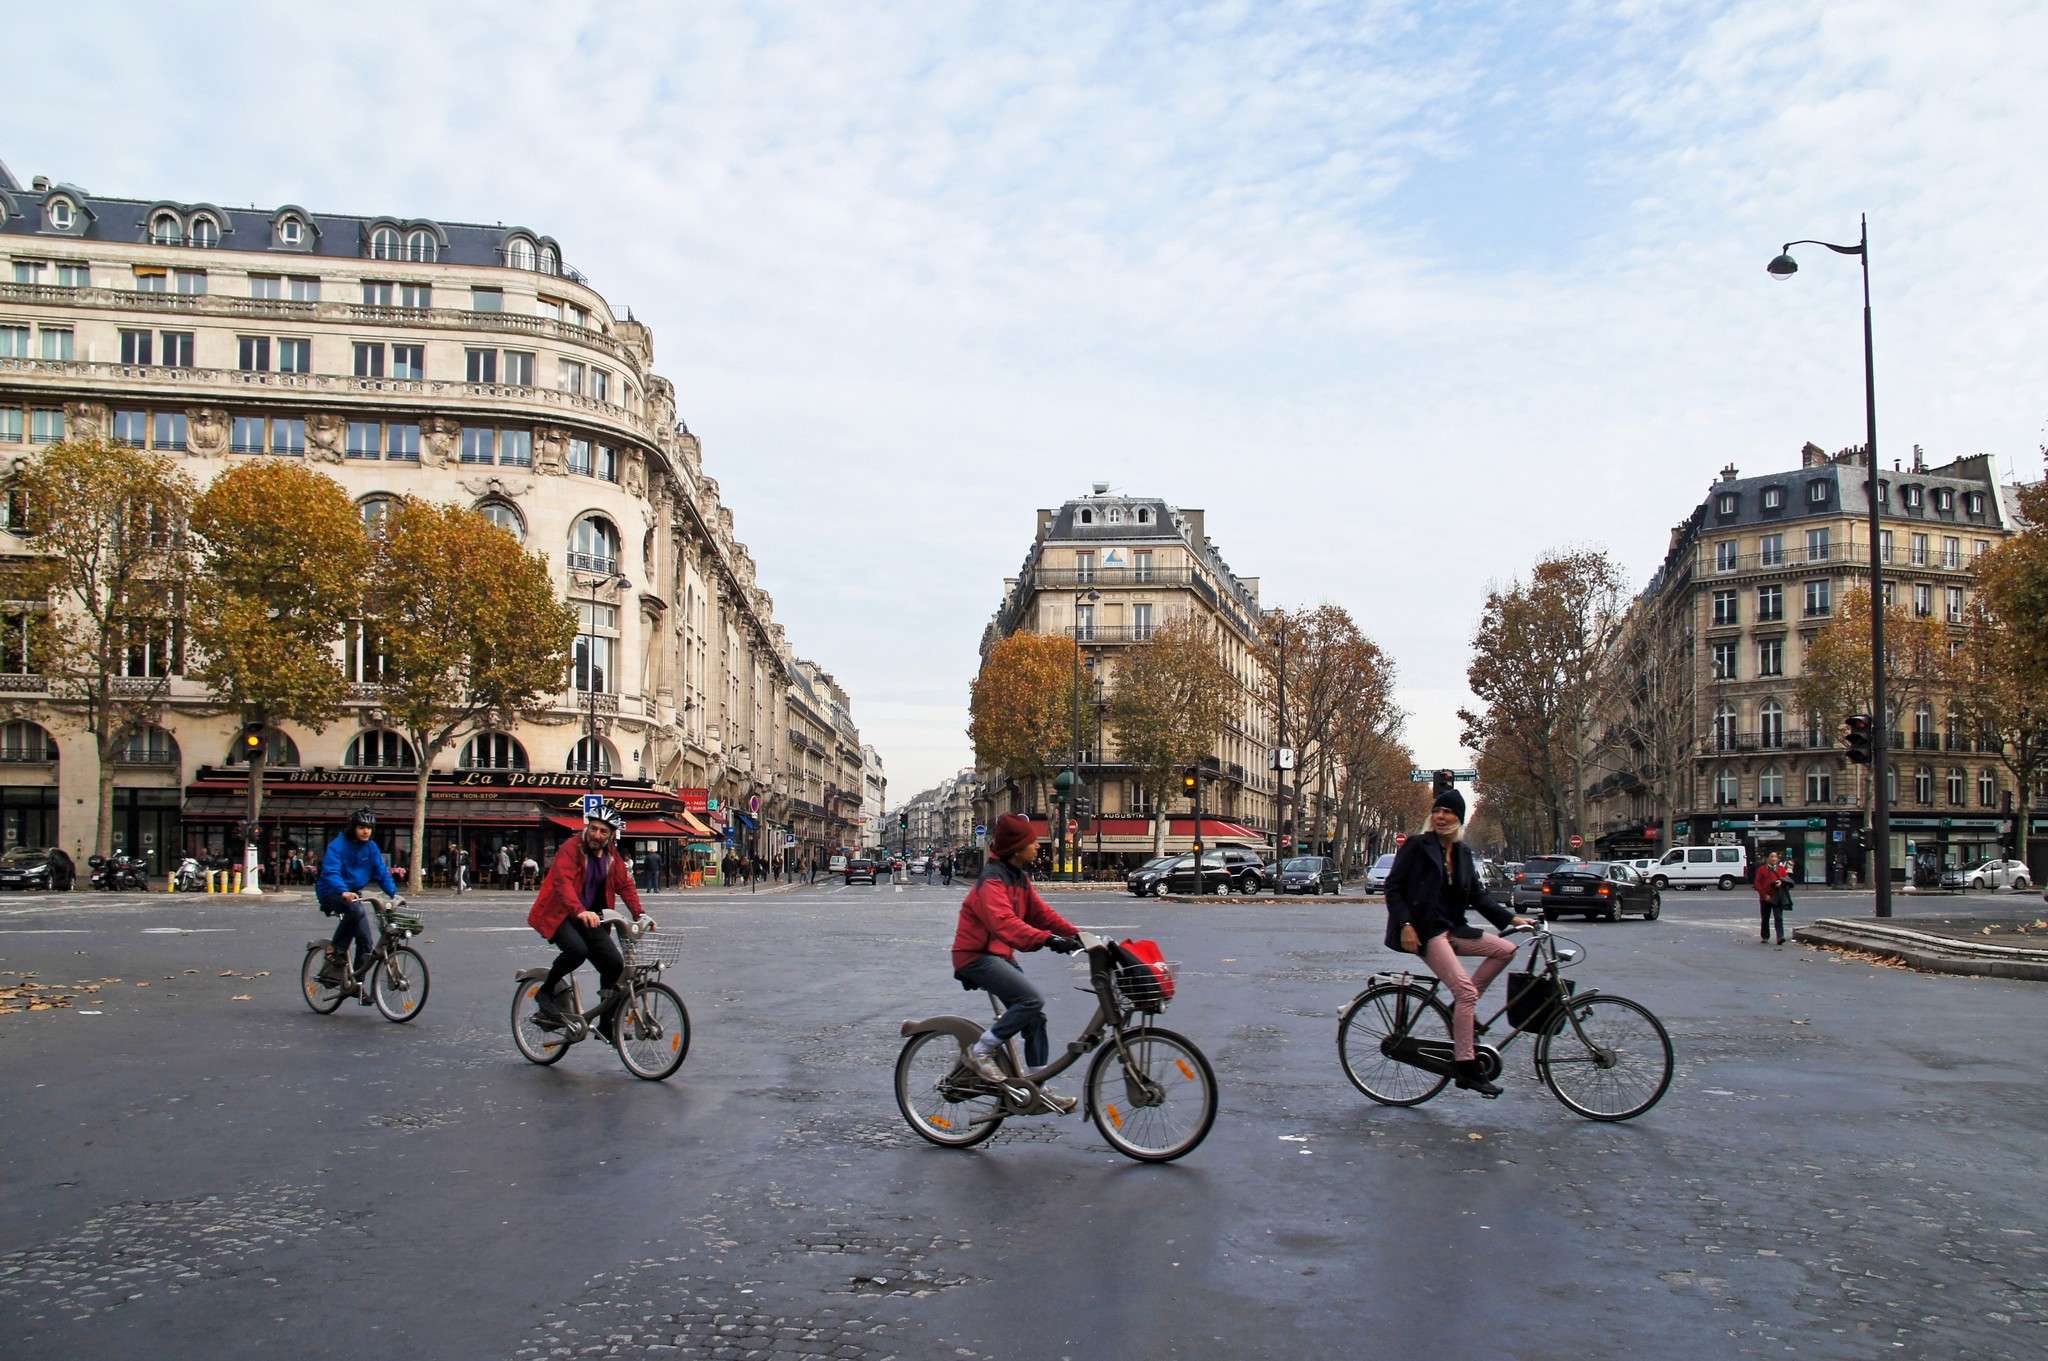 Since France emerged from its two-month lockdown in May, the number of cyclists in Paris has skyrocketed, increasing by more than 50 percent, according to the city council. 